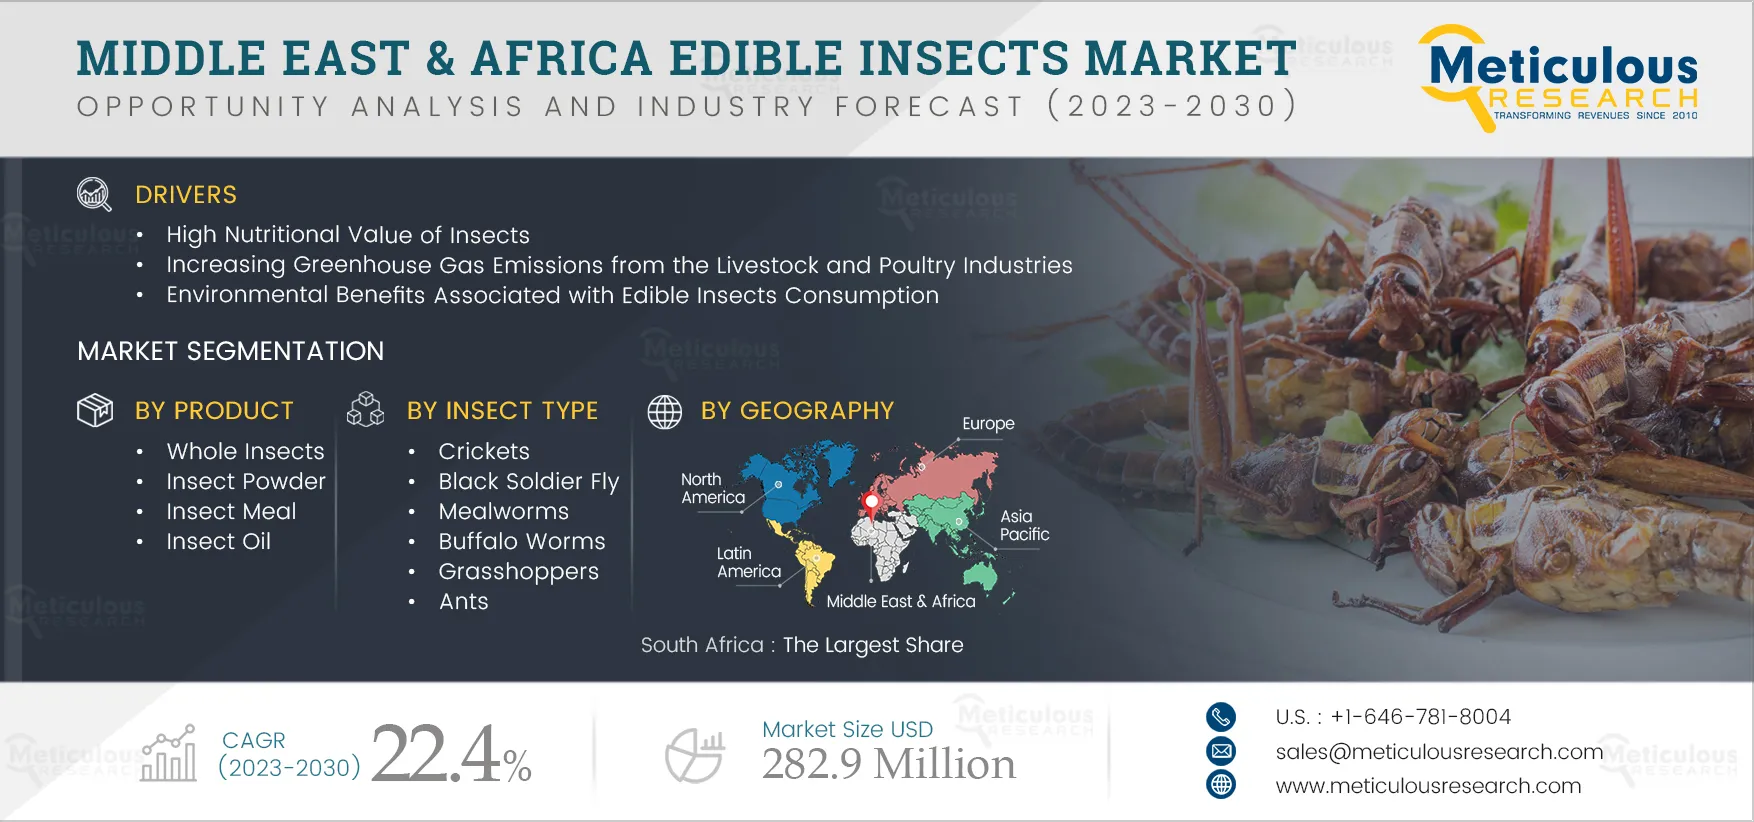 Middle East & Africa Edible Insects Market